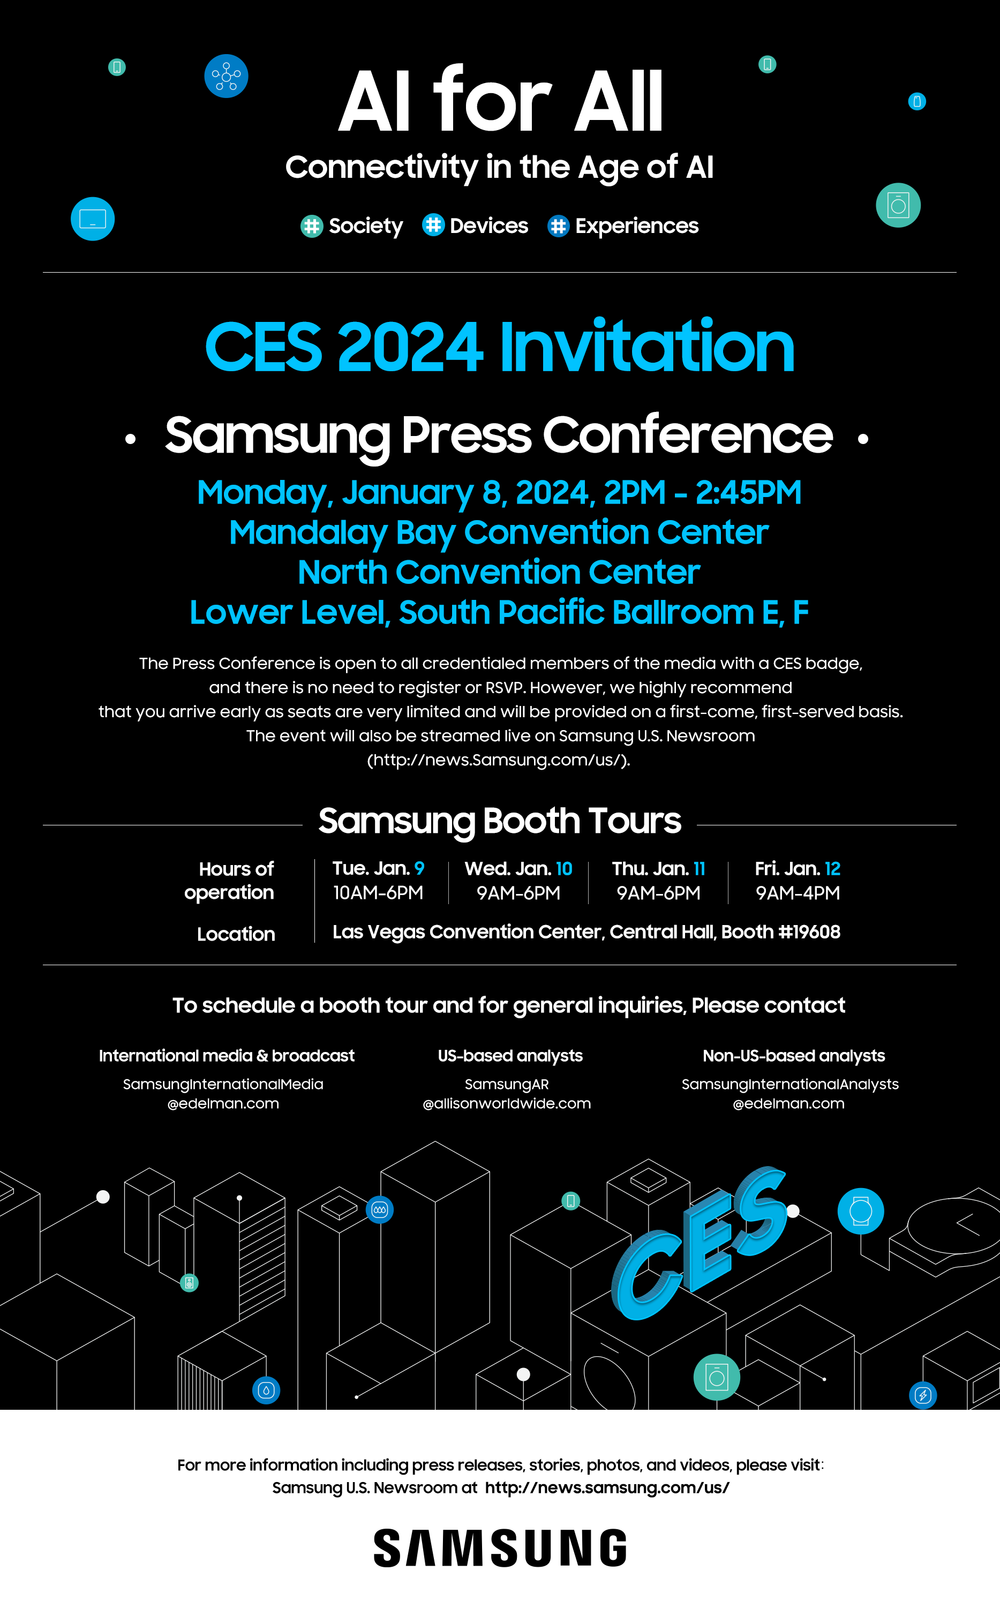 ᐈ Samsung Press Conference at CES 2024 ‘AI for All Connectivity in the